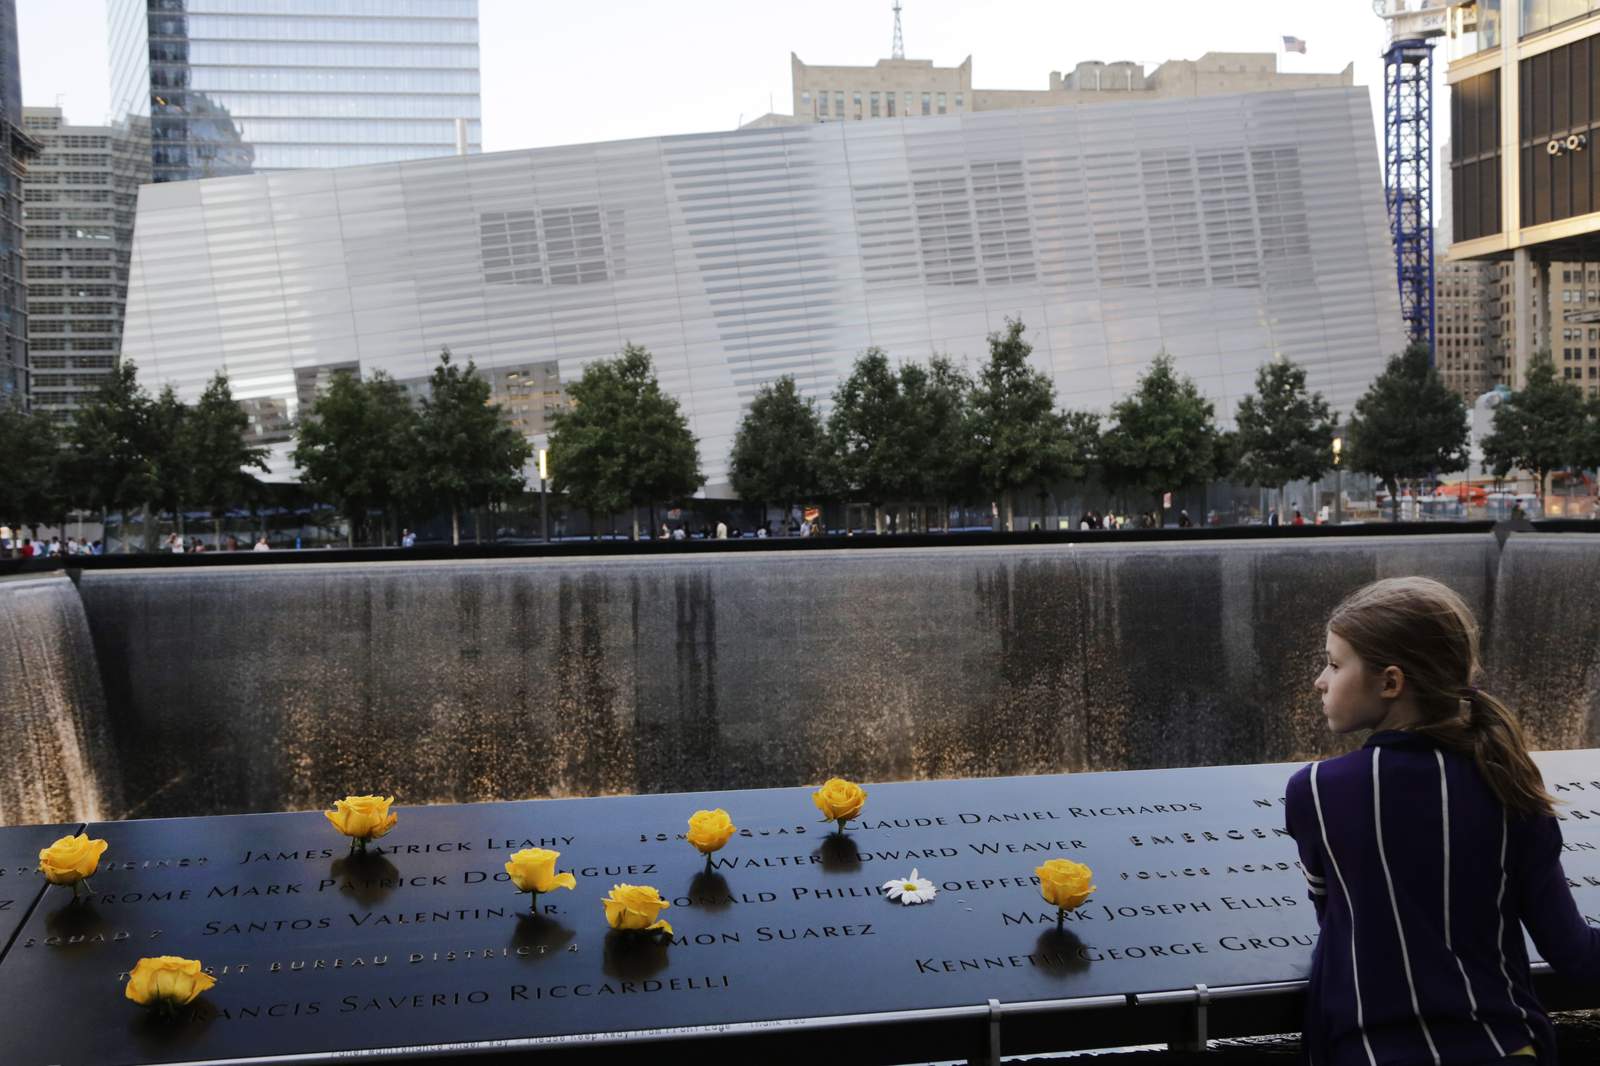 Live stream: 9/11 observance ceremonies on 19th anniversary of the attacks